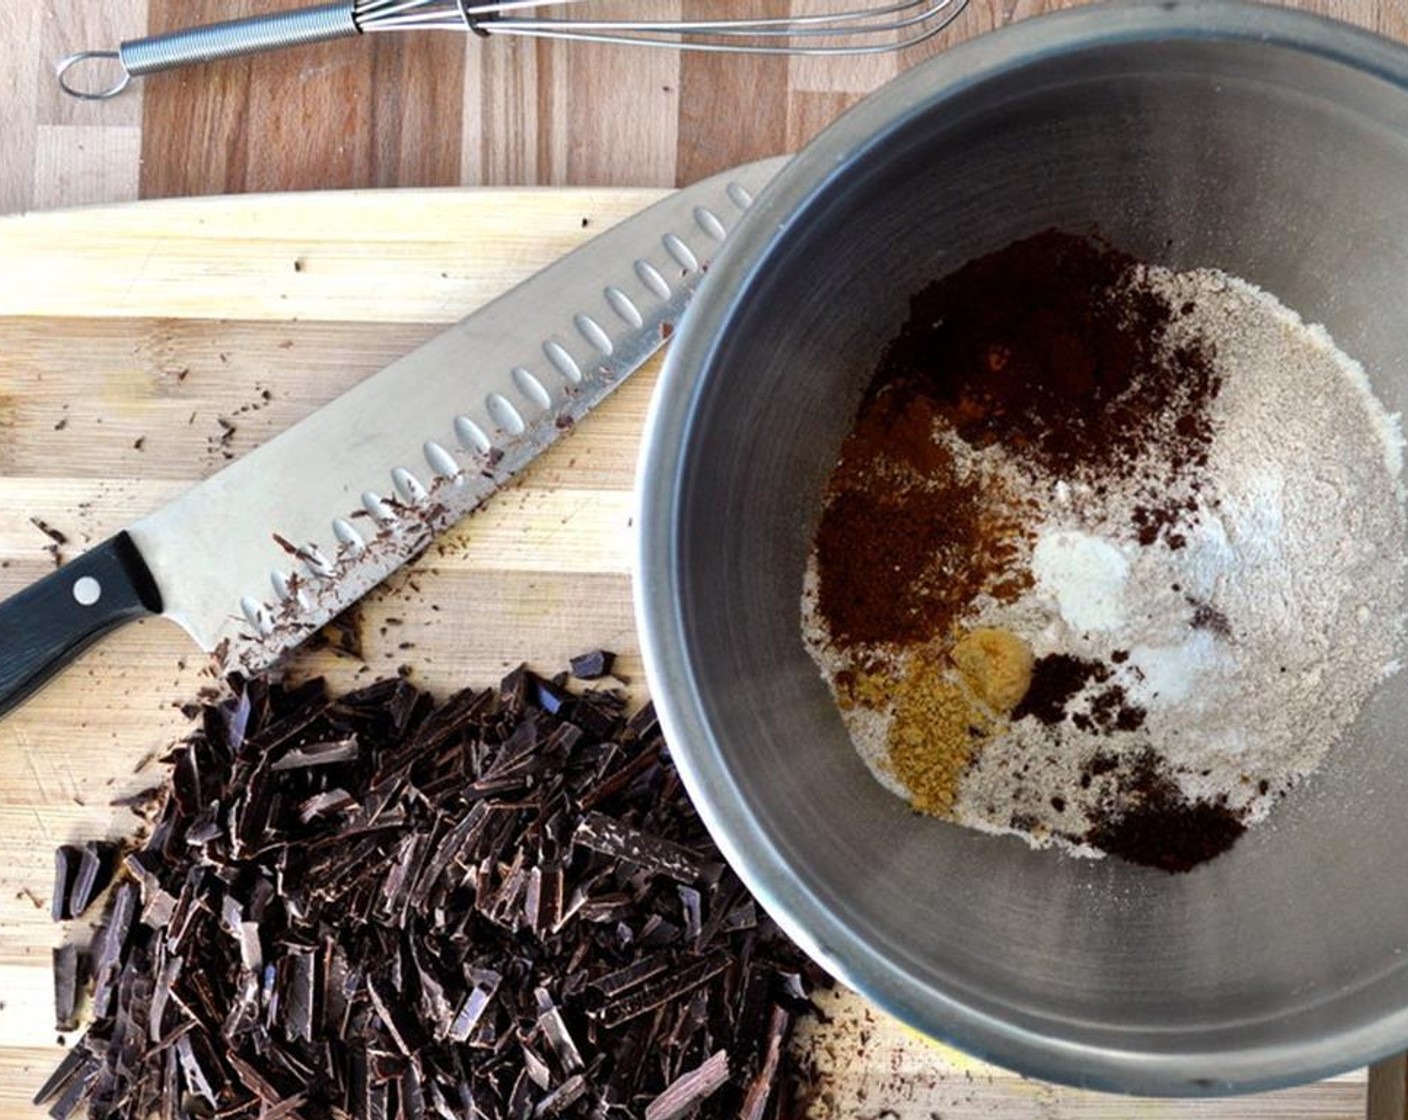 step 1 Measure and combine Ground Cinnamon (1/2 tsp), Ground Nutmeg (1/2 tsp), Ground Ginger (1/2 tsp) and Ground Cloves (1/4 tsp). Place in a medium bowl.